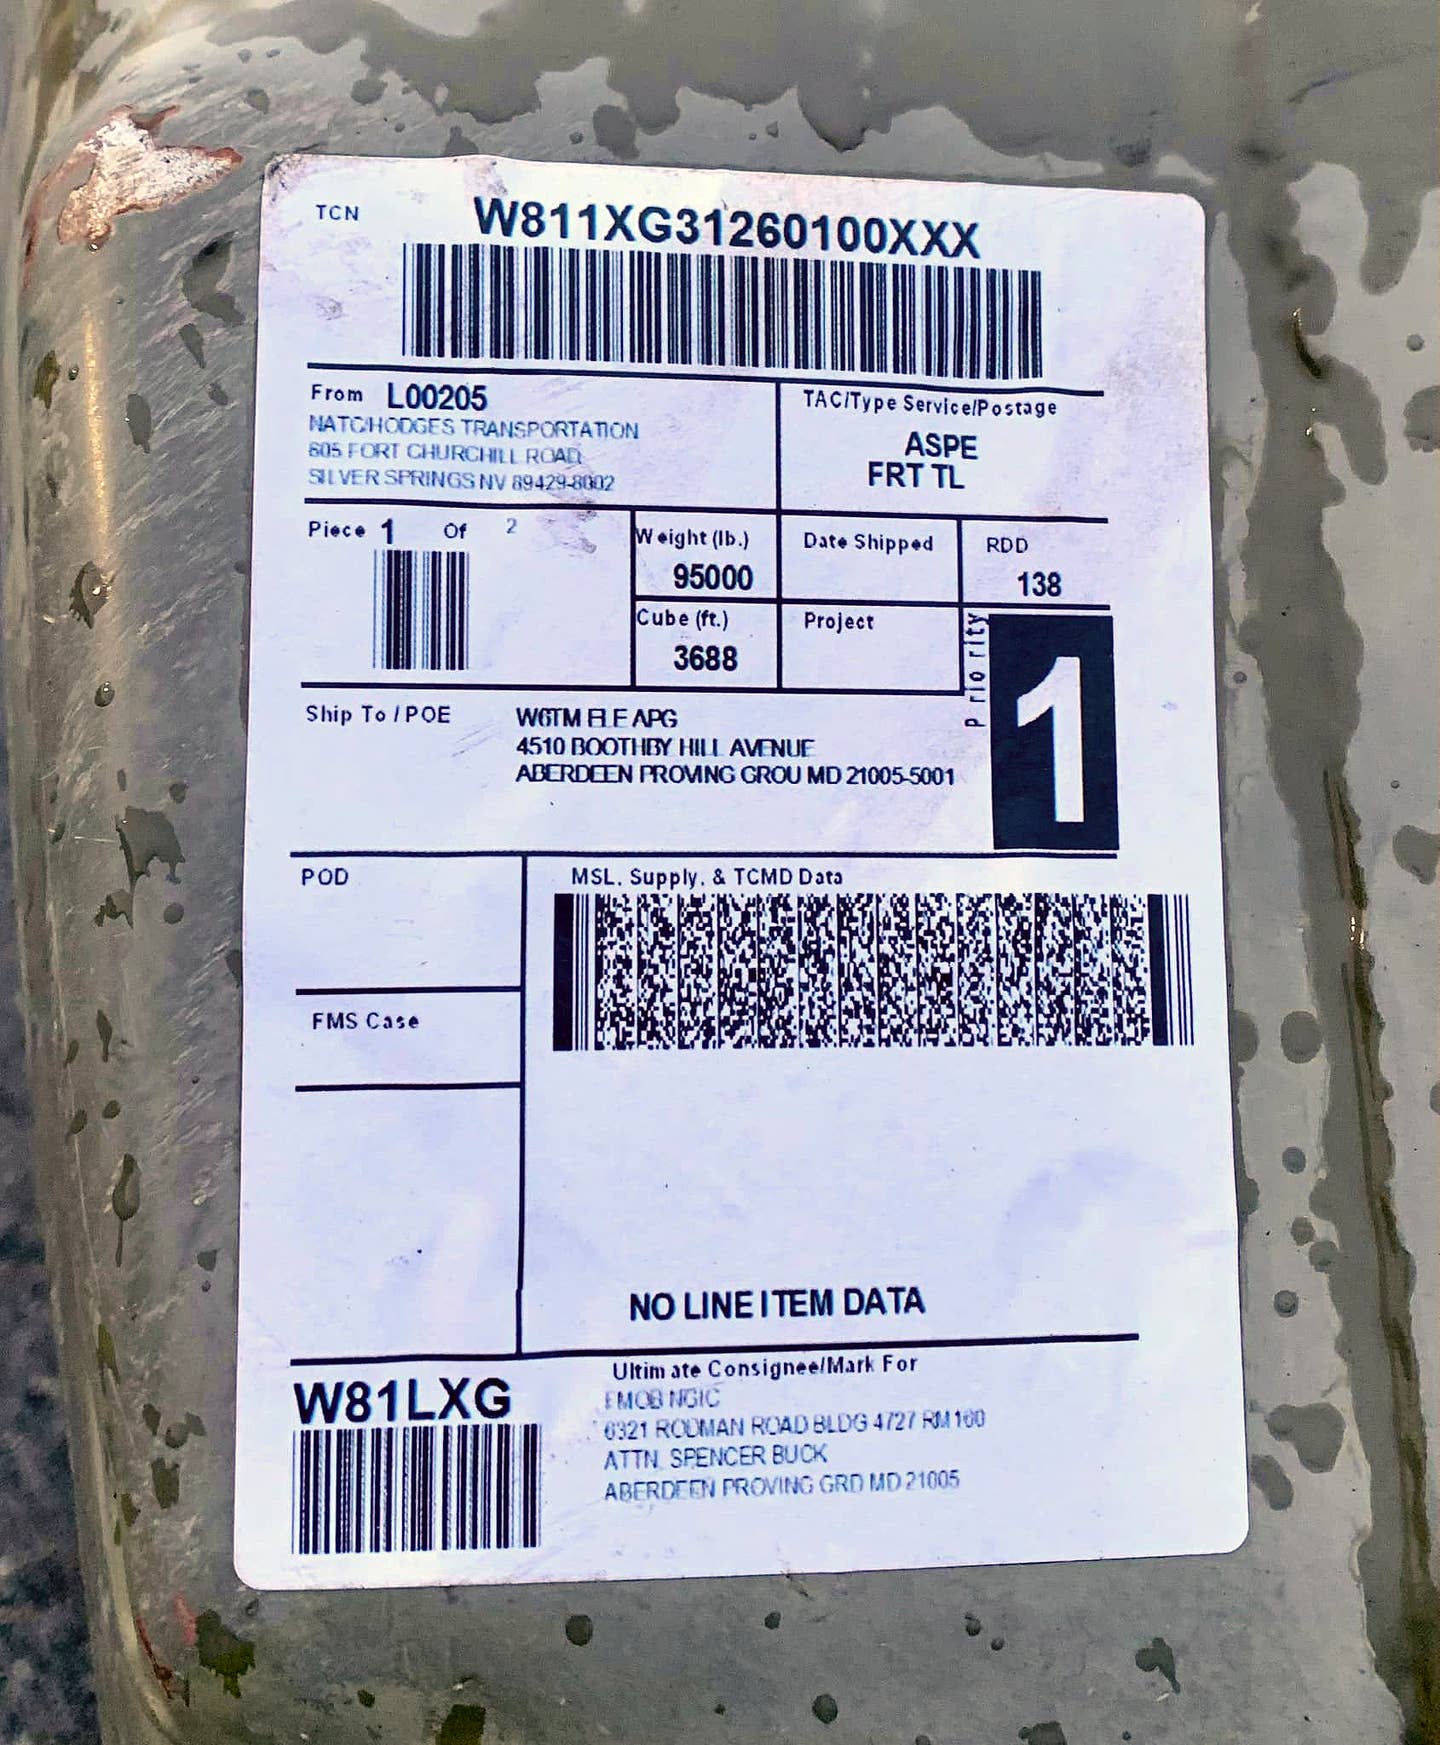 A shipping label on the tank shows that it came from the National Automotive Test Center in Nevada and is bound for the Aberdeen Proving Ground in Maryland. (Courtesy Dave Trojan)